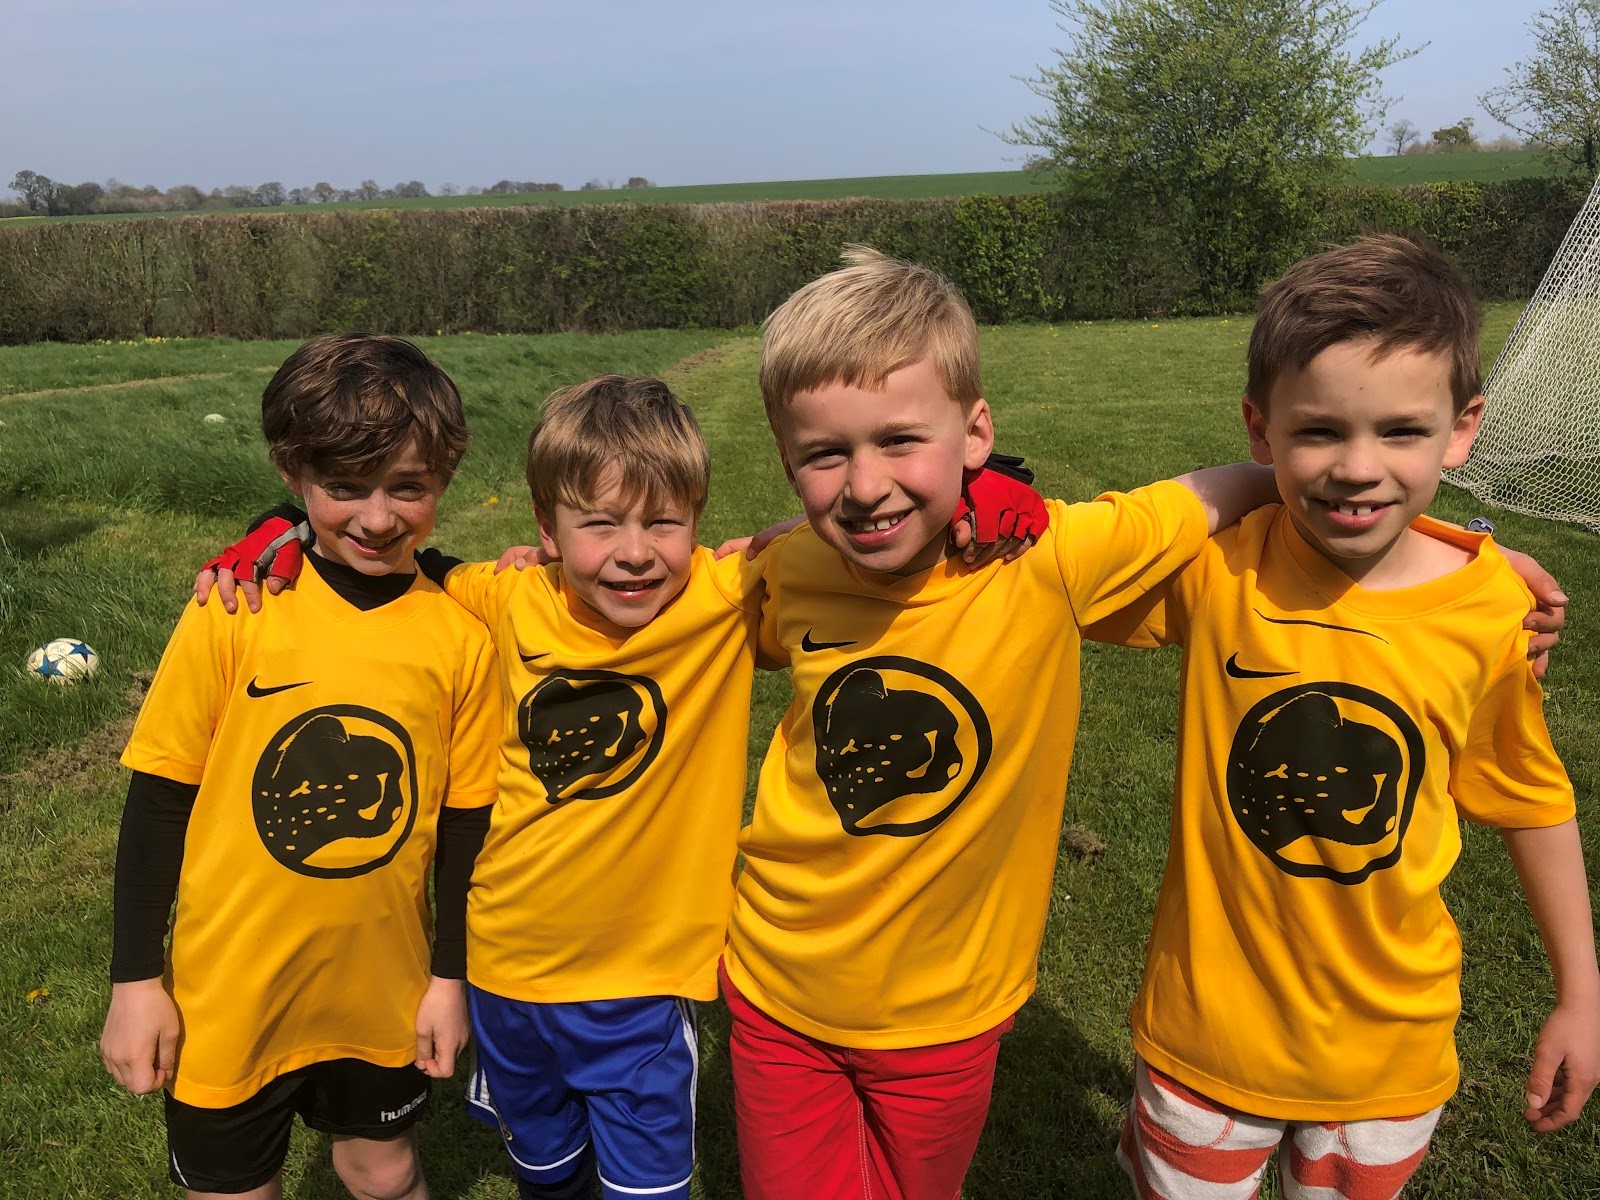 Edgeborough School: From T-Shirts designed by a Royal Academy Artists to Teamwork and Bake Sales: Meet the Golden Cheetahs!